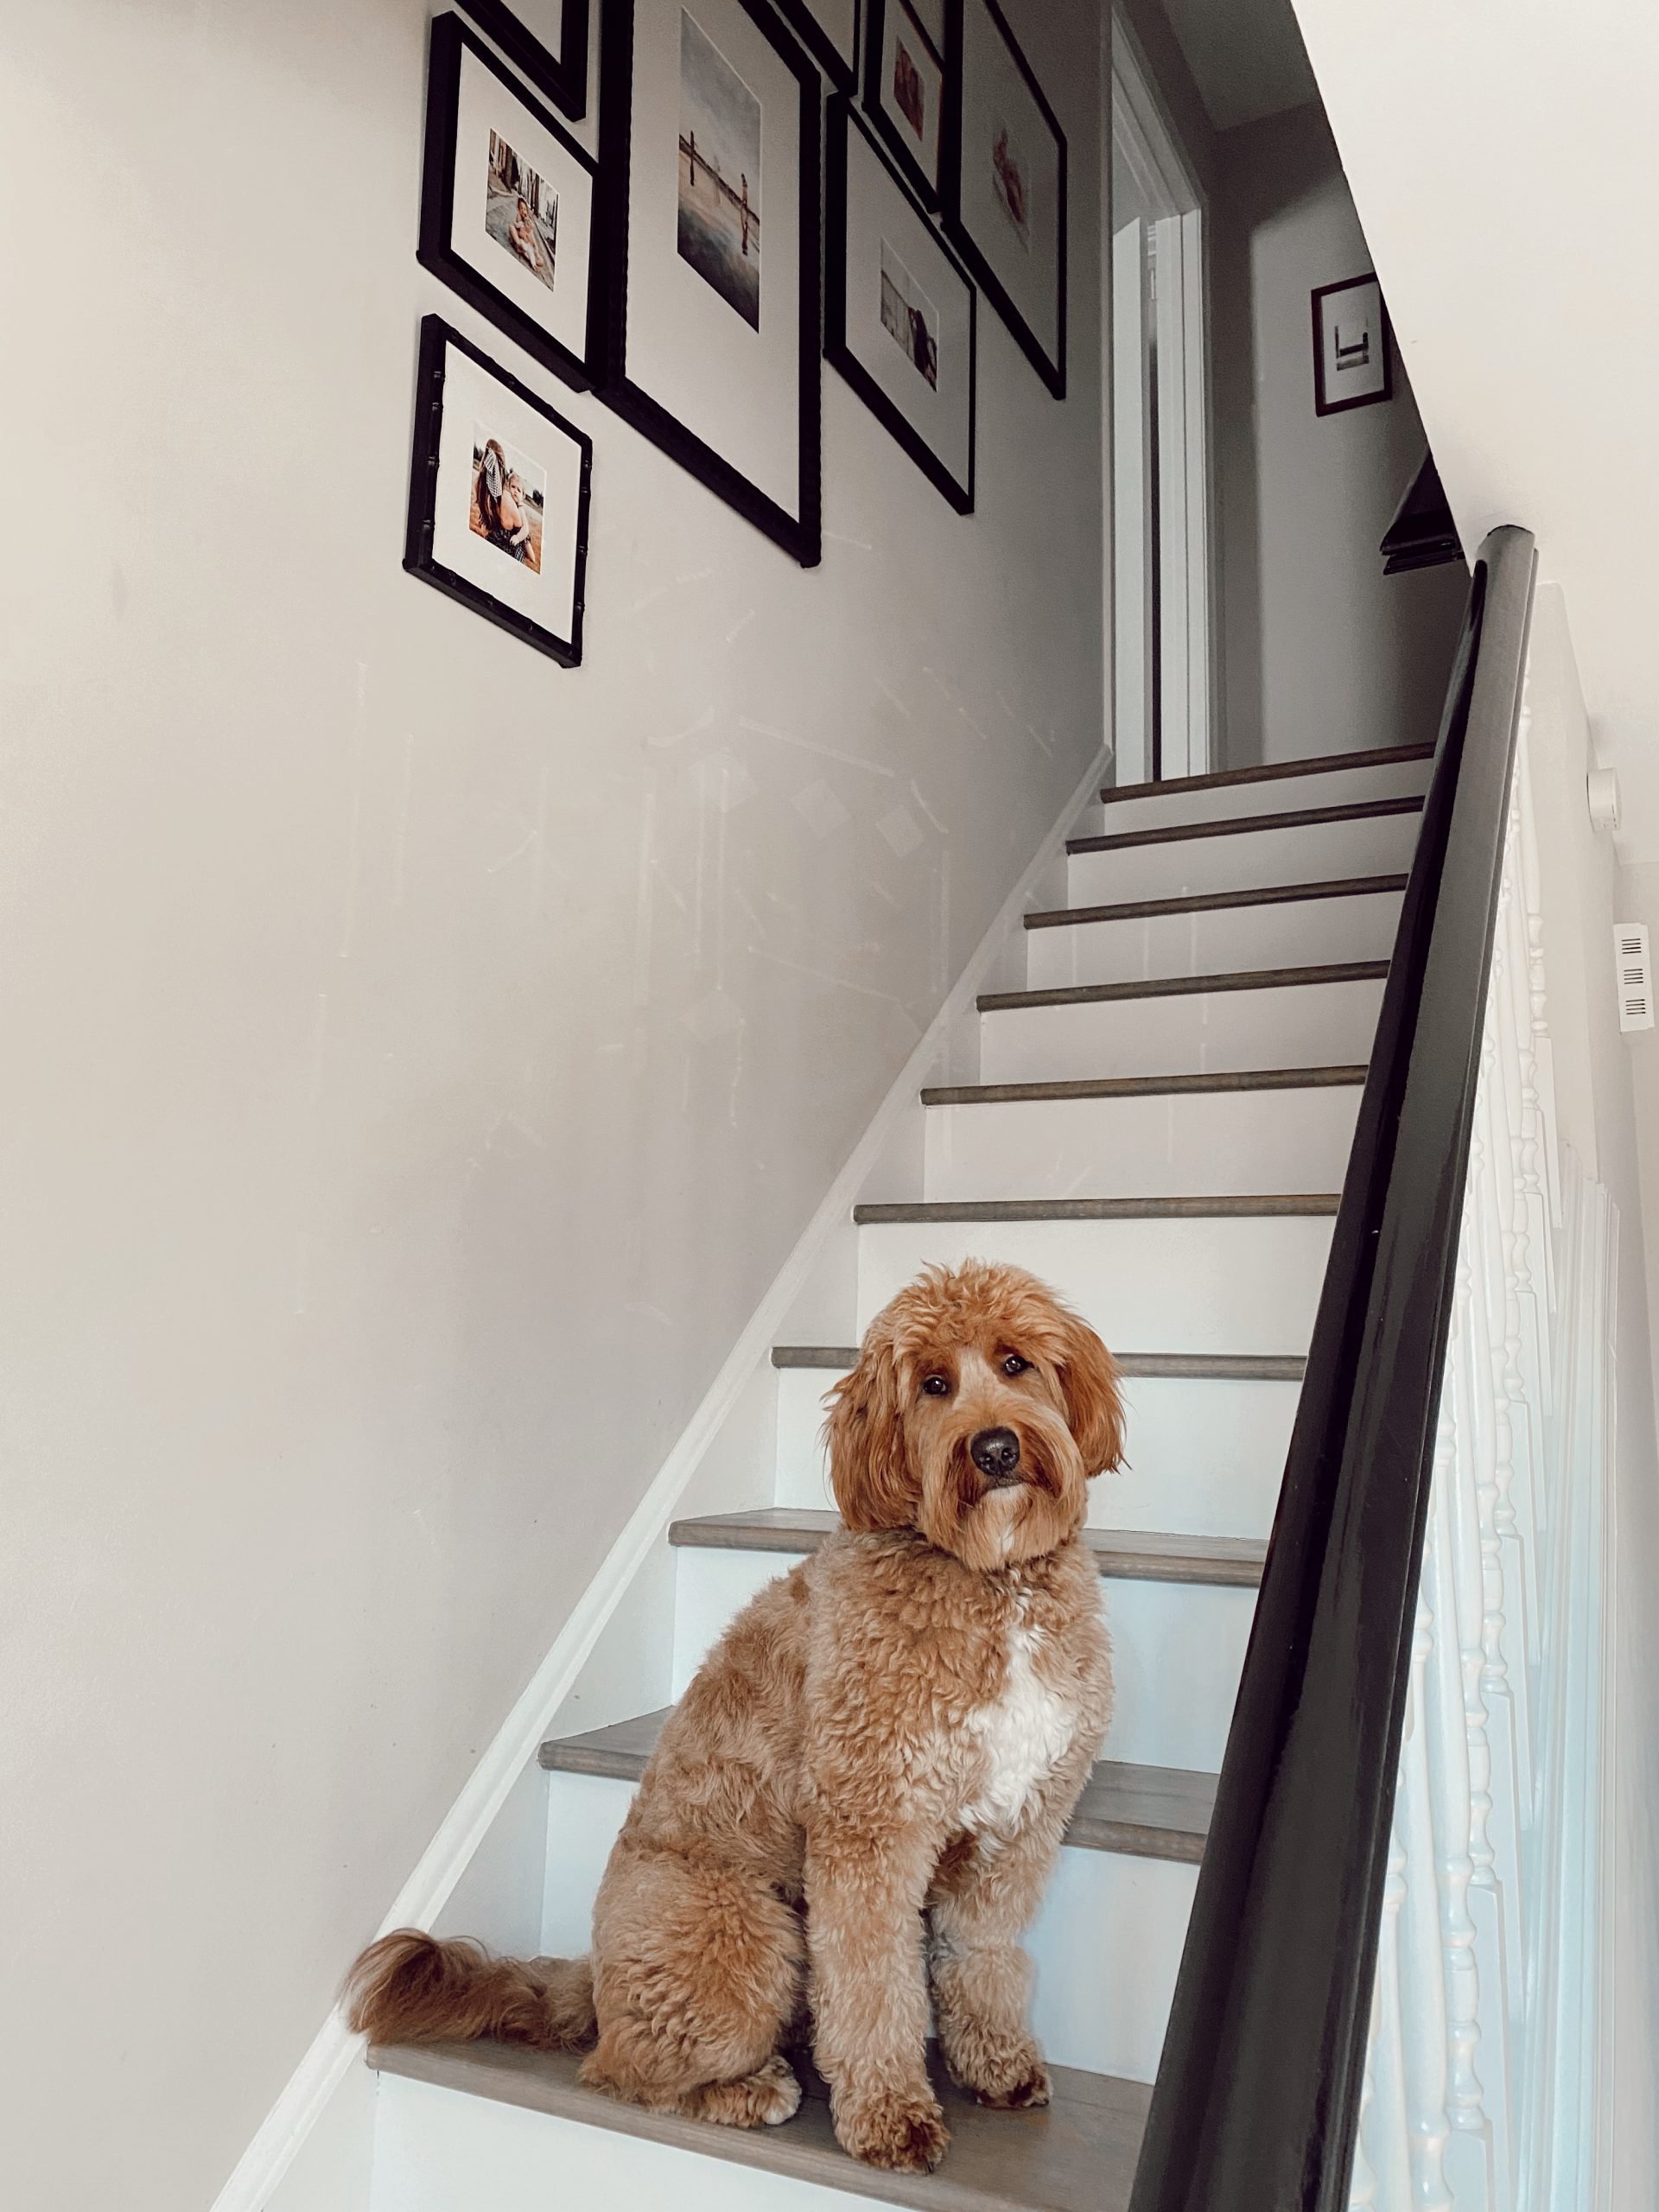 a goldendoodle dog sitting on a staircase in front of a gallery wall hung on the wall of black frames